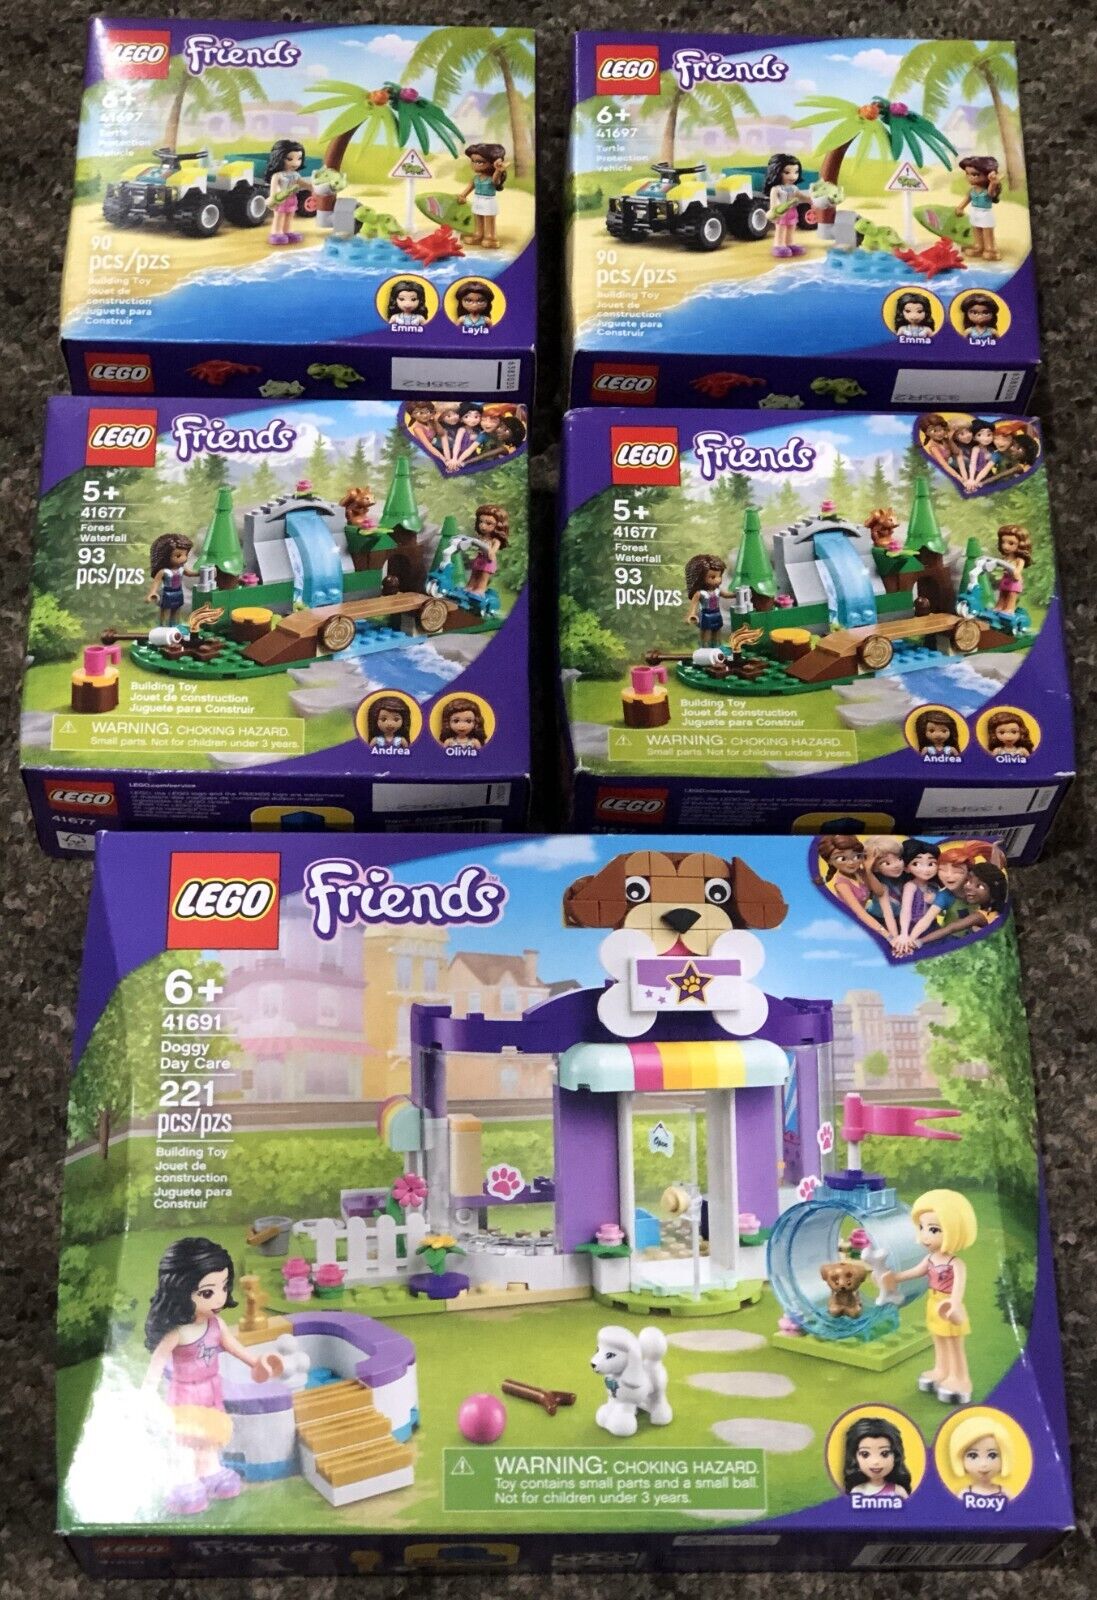 Lot of 5 New Lego Friends 41691 -- 2x 41677 & 2x 41697 -- FREE SHIPPING